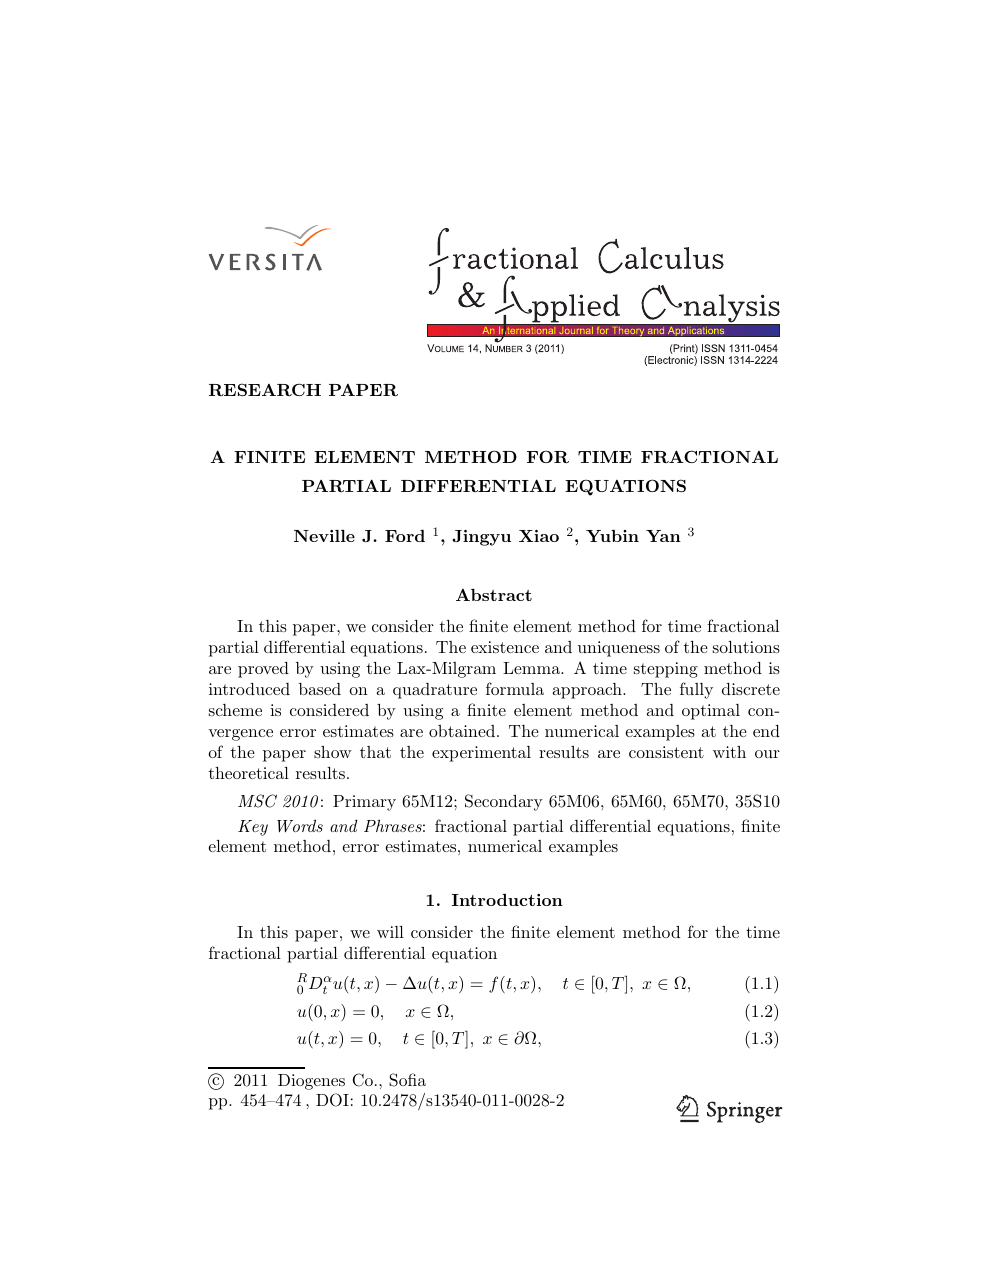 A Finite Element Method For Time Fractional Partial Differential Equations Topic Of Research Paper In Mathematics Download Scholarly Article Pdf And Read For Free On Cyberleninka Open Science Hub